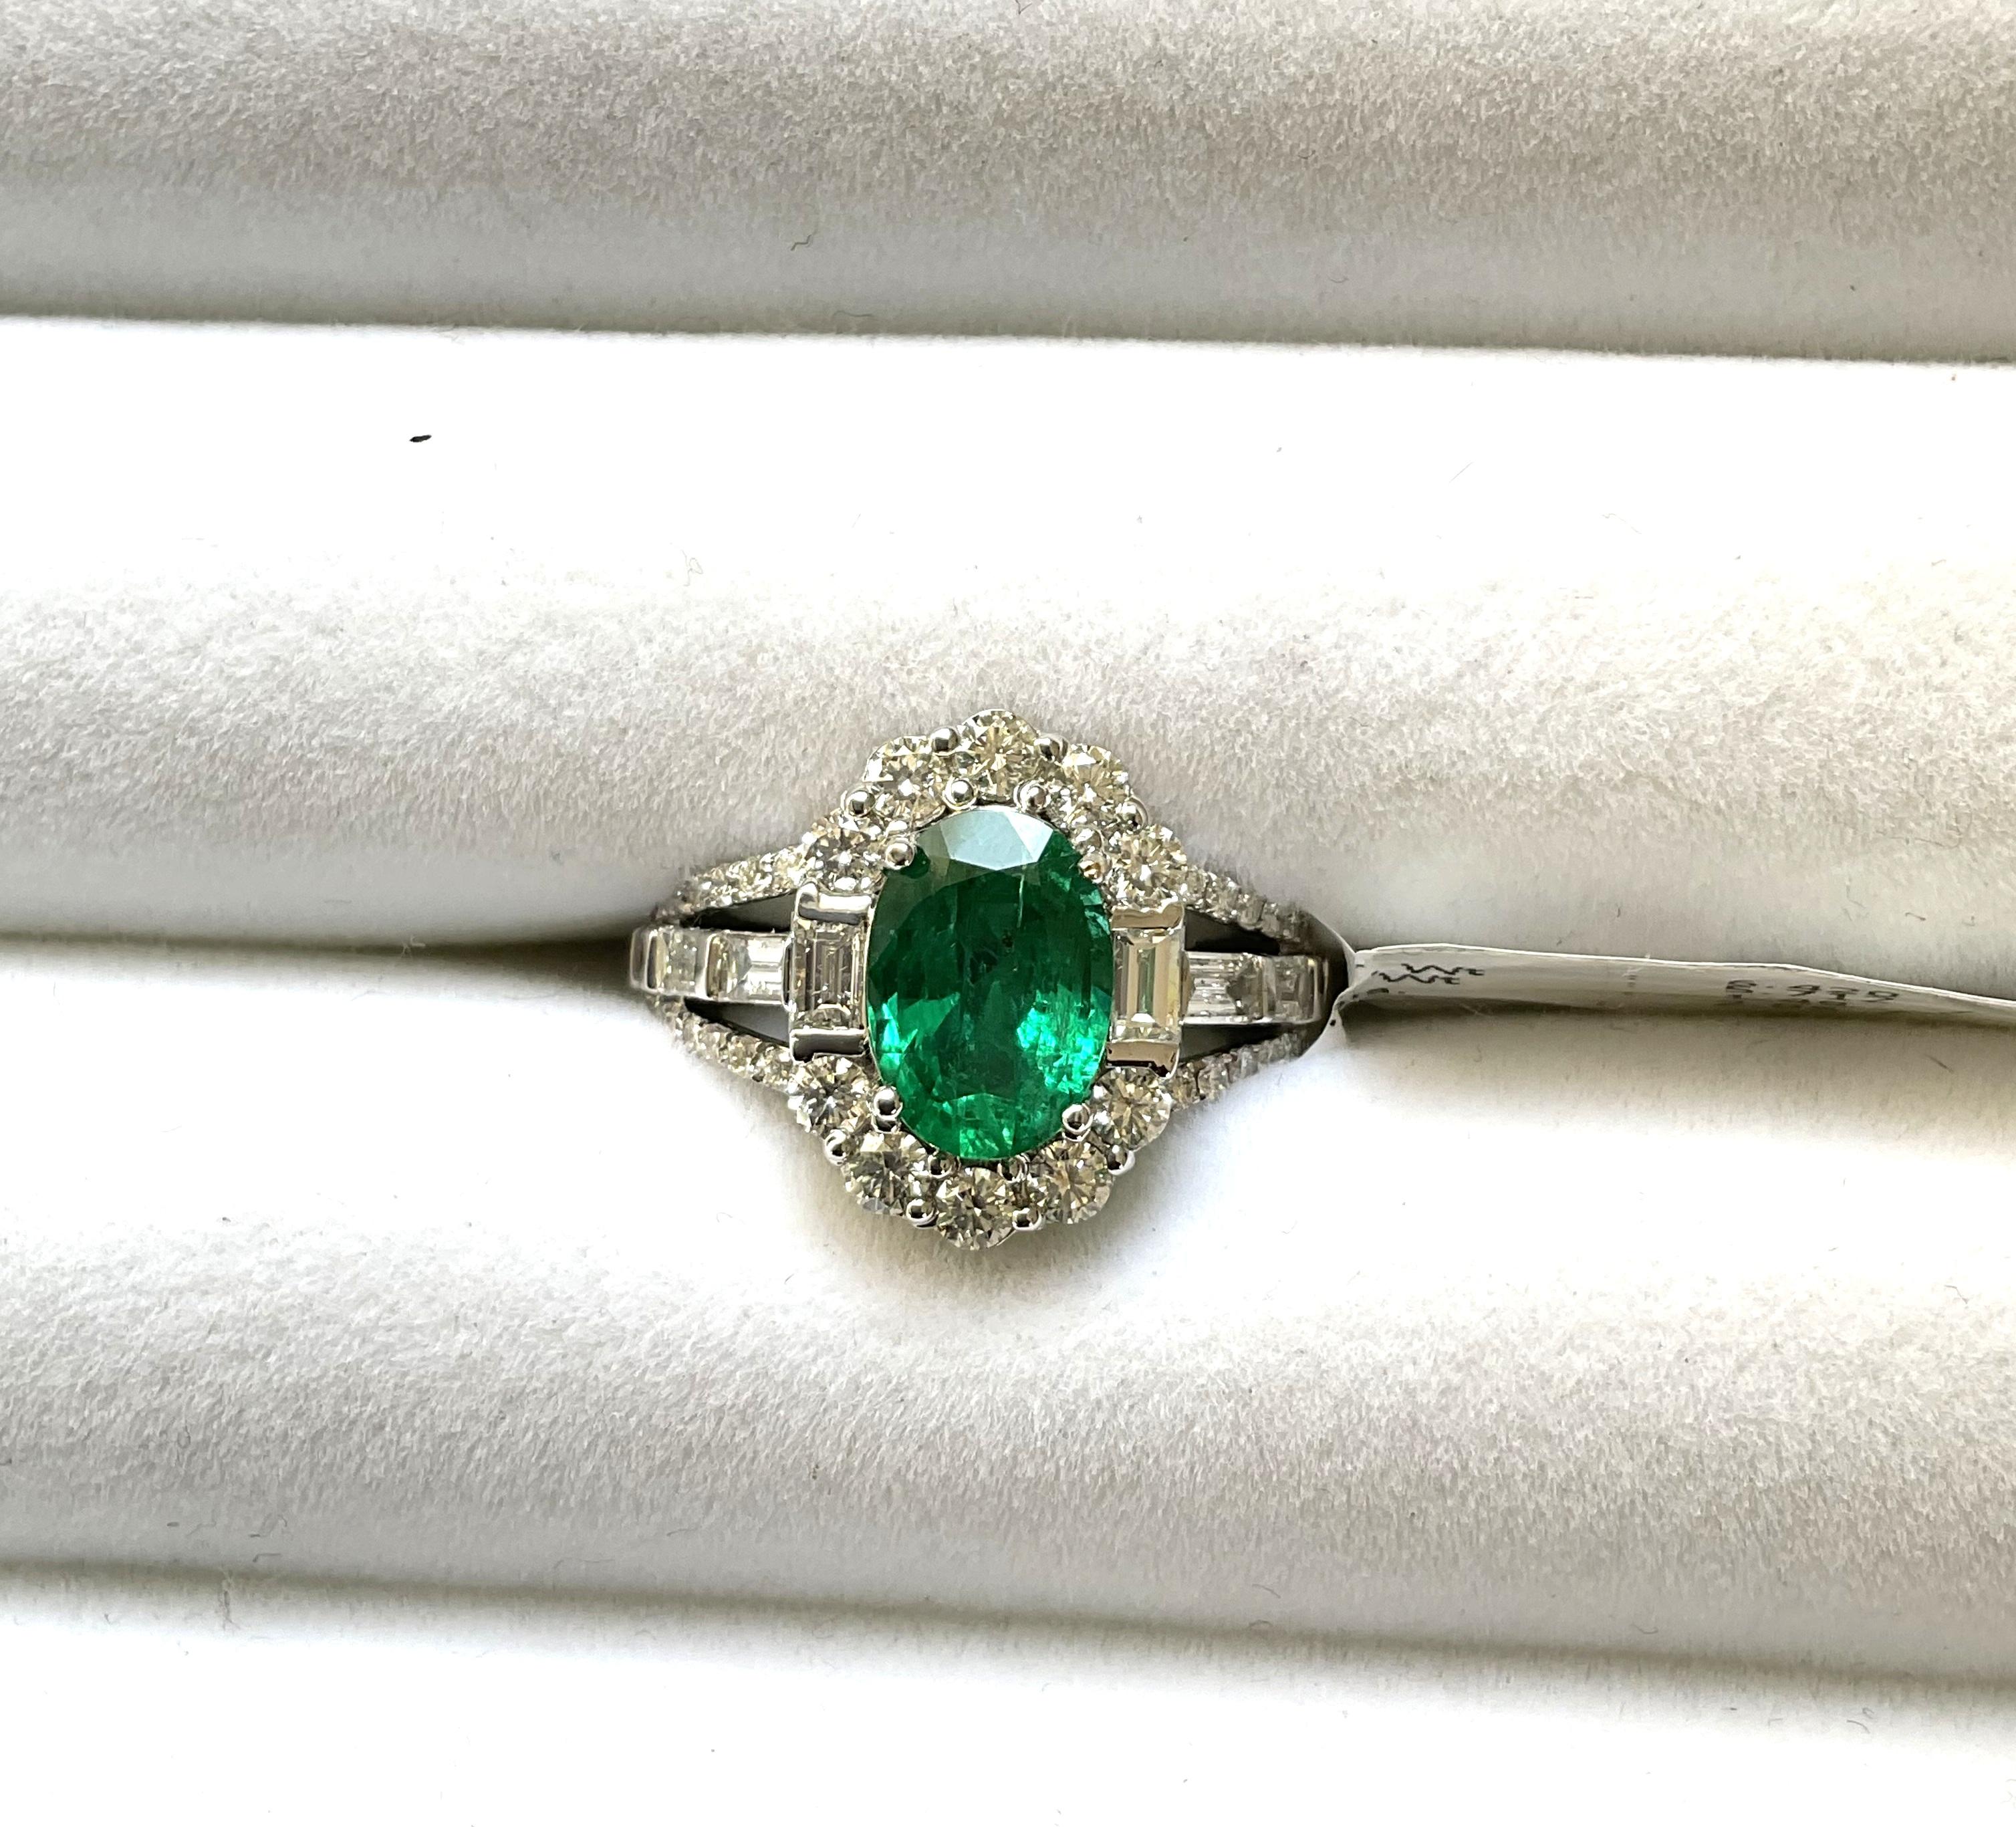 18k Gold Art Deco Zambian Emerald Cocktail Ring 2.05 cts with 1.49 ct Diamonds  For Sale 8